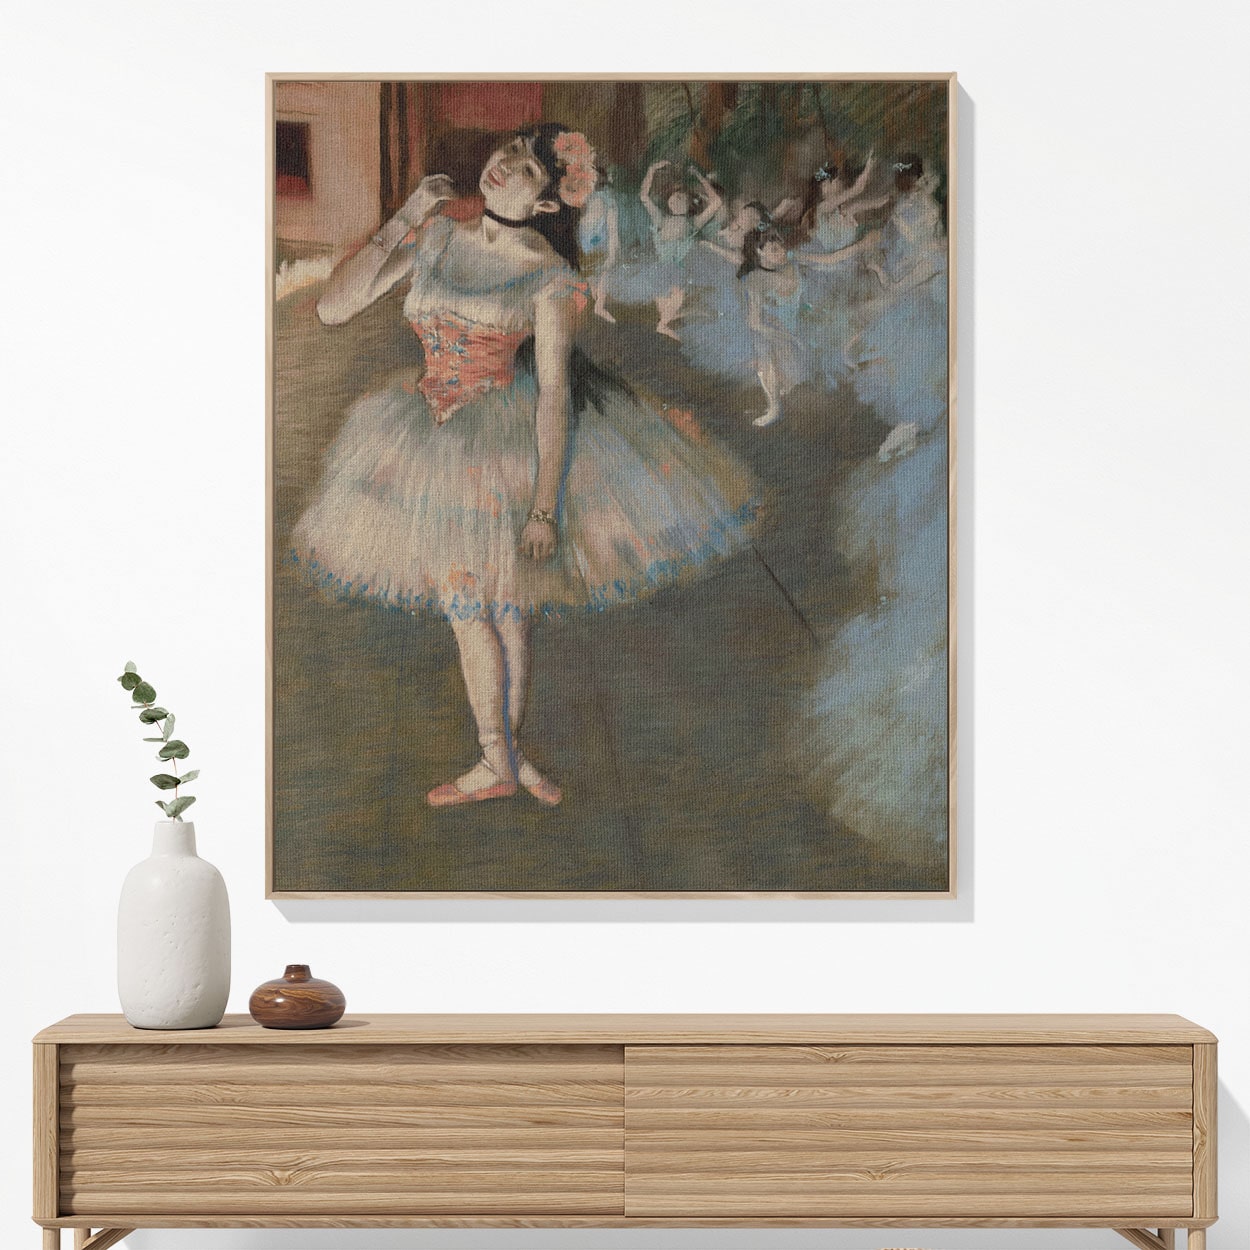 Ballerina Painting Woven Blanket Woven Blanket Hanging on a Wall as Framed Wall Art